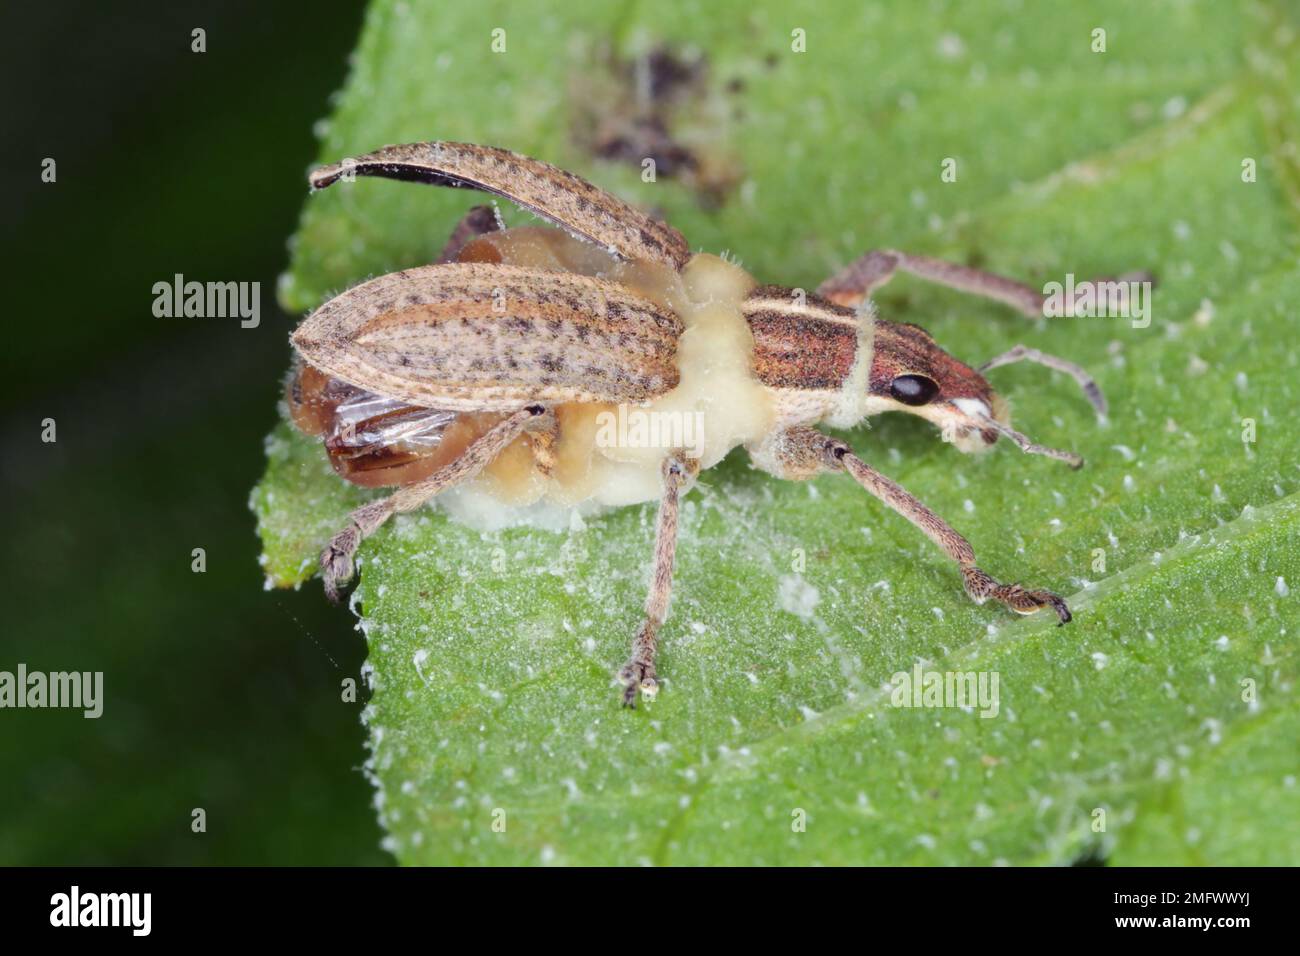 Beetle weevil infected by an entomopathogenic fungus Beauveria bassiana a parasite on various arthropod species, causing white muscardine disease Stock Photo